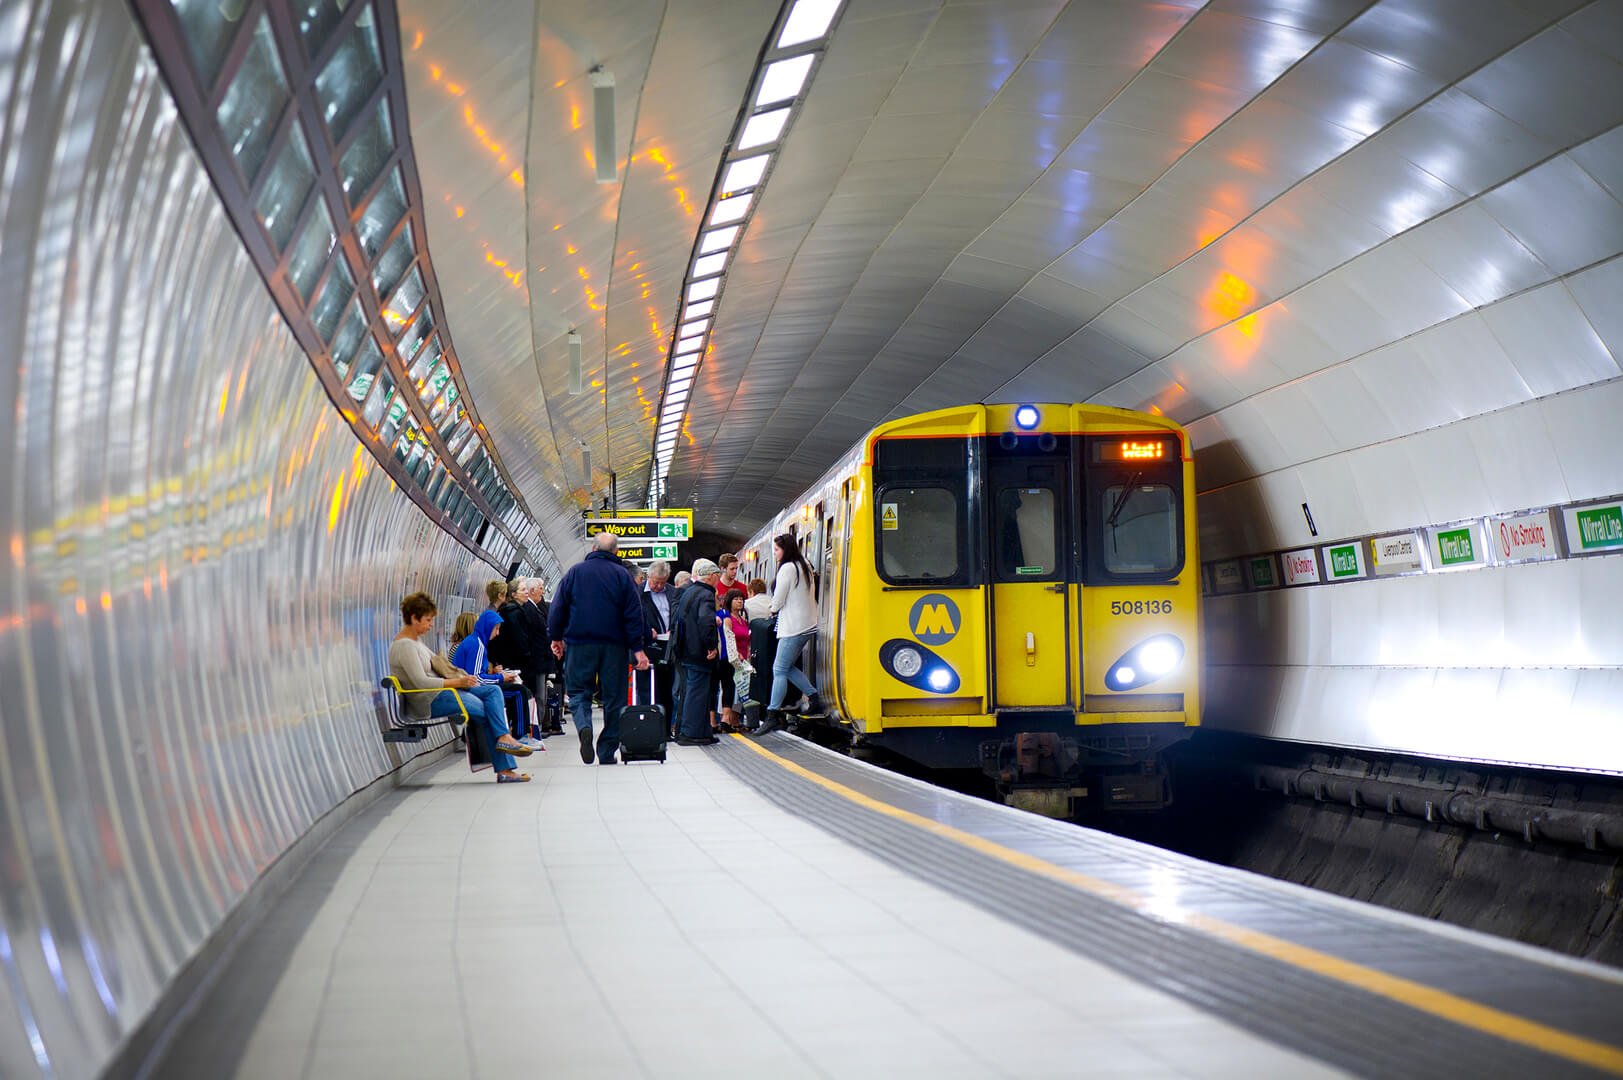 Passengers leaving a Merseyrail train at a busy underground station platform.